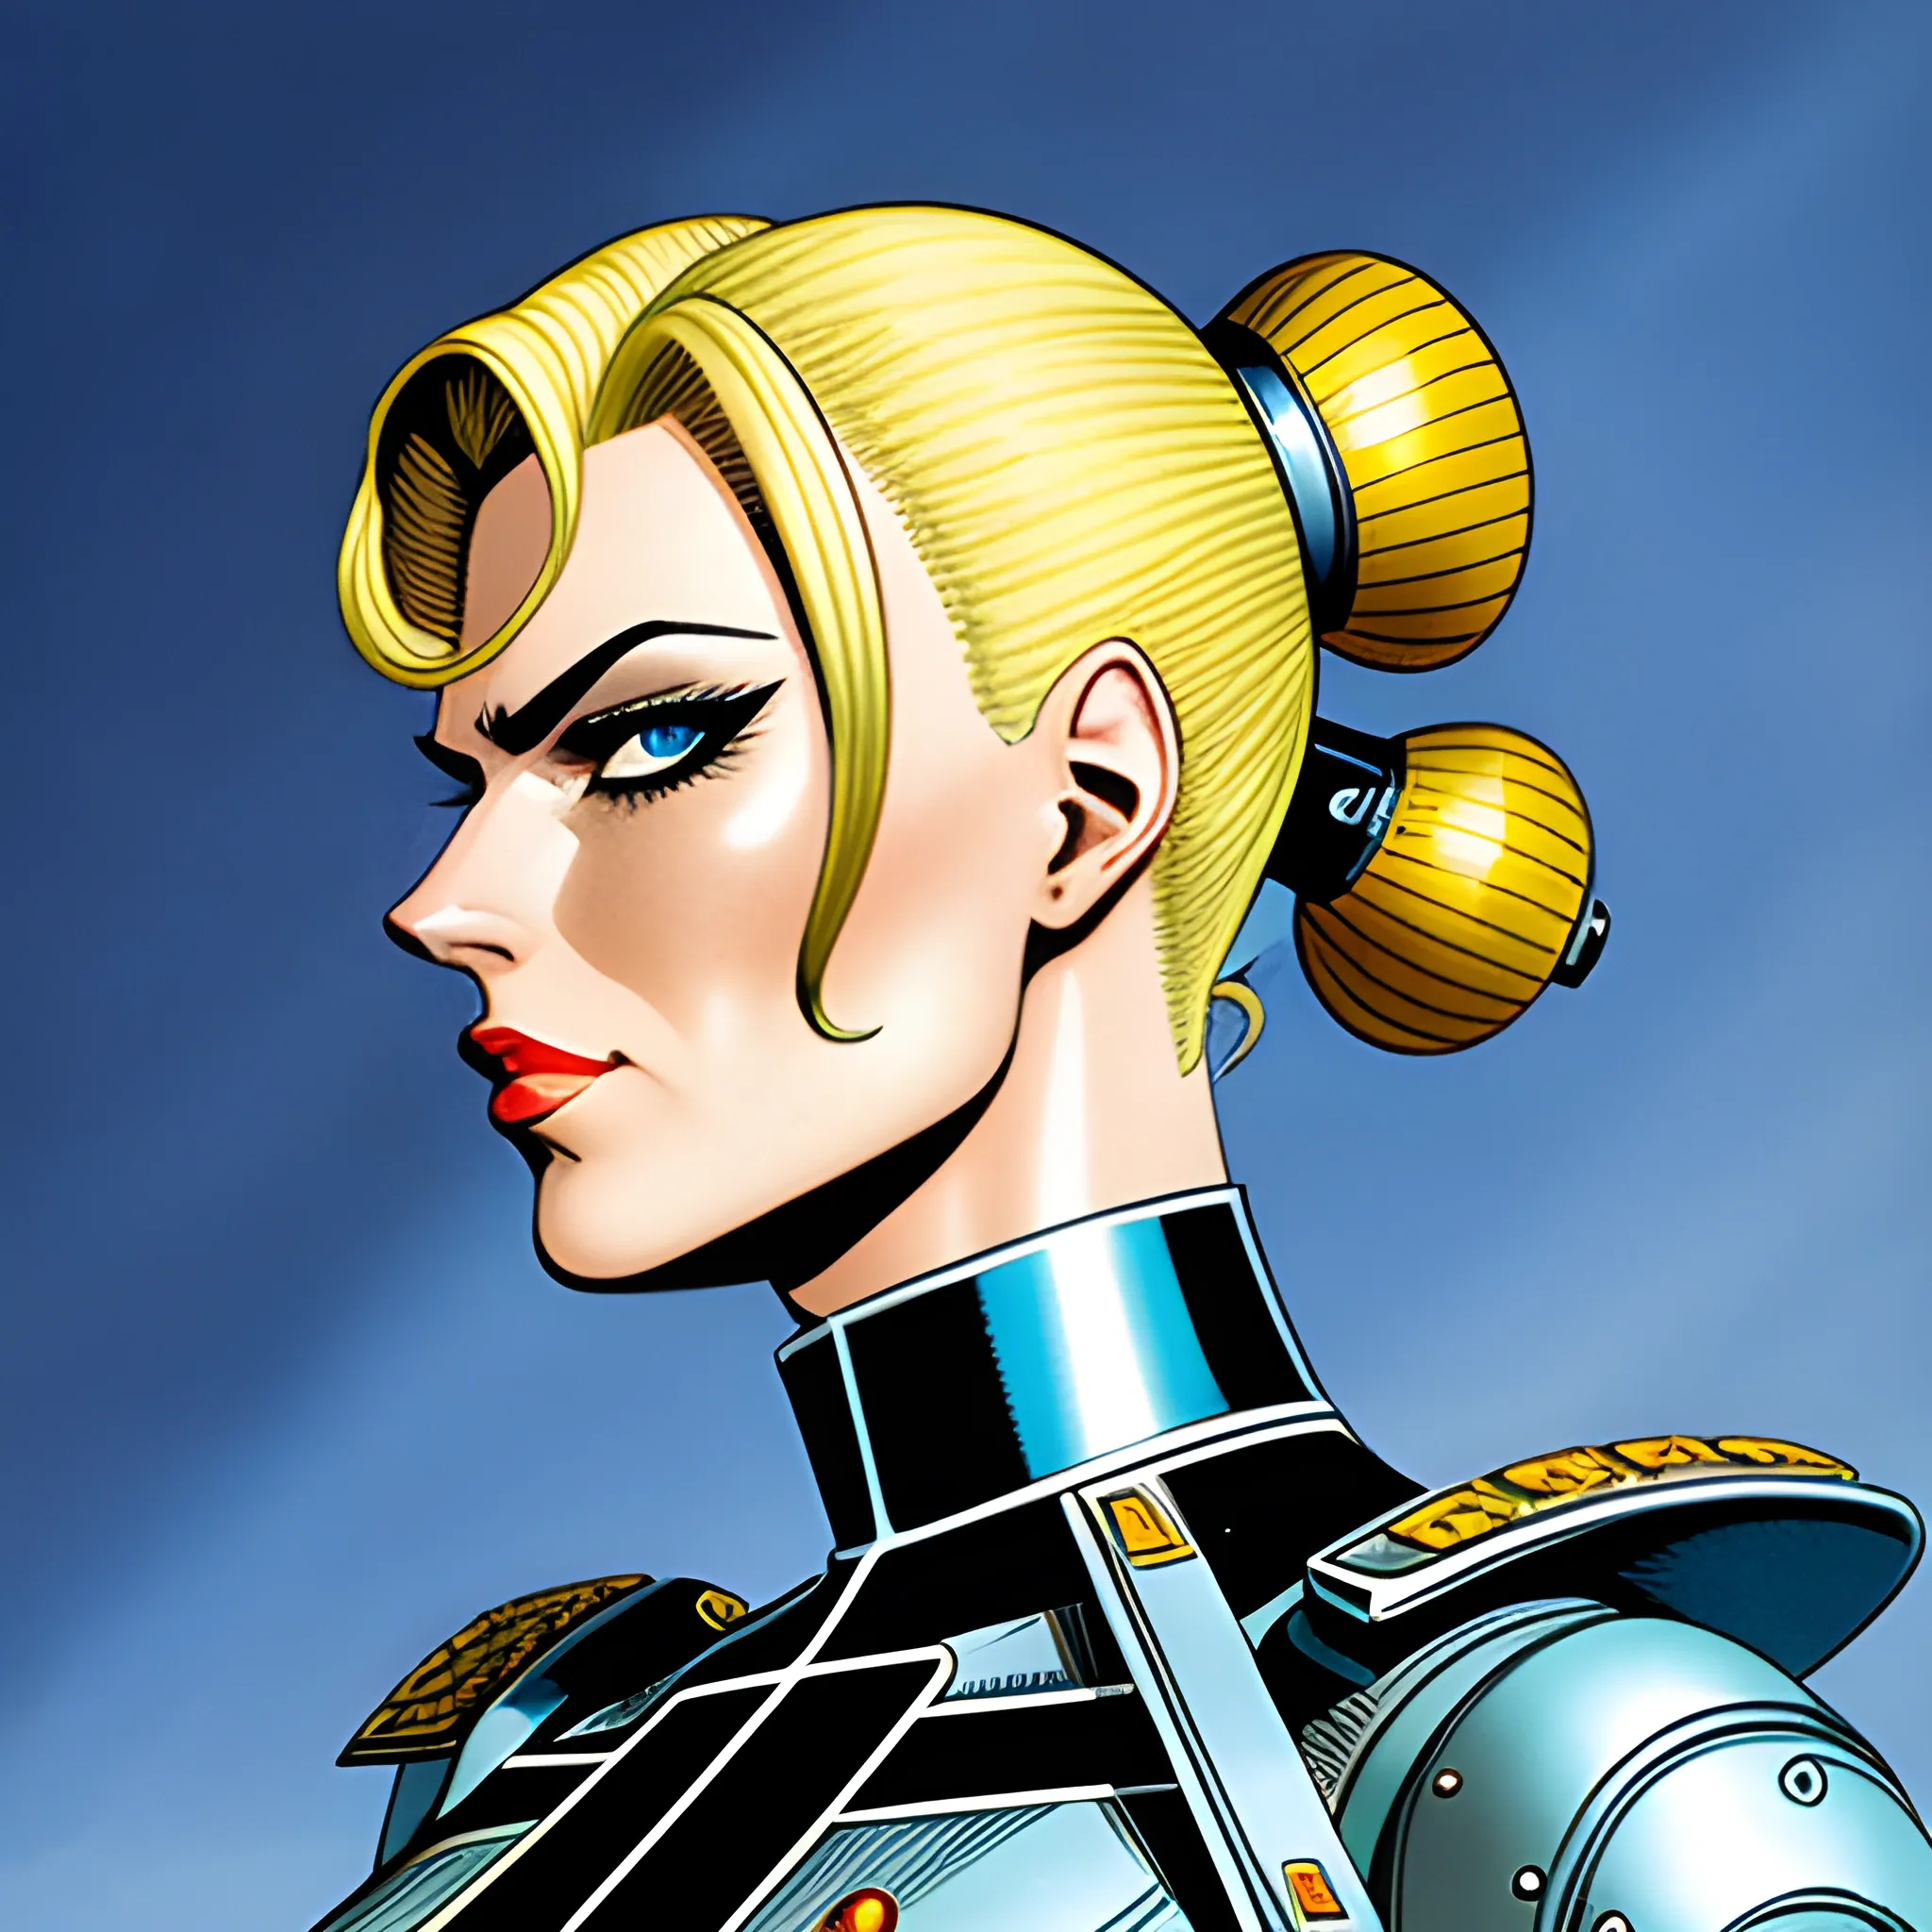 futuristic steampunk giant starship, macro art, portrait of stern anime girl blonde hair blue eyes wearing military nazi ss uniform, ripples, illustration by al williamson, perfect face viewed in profile